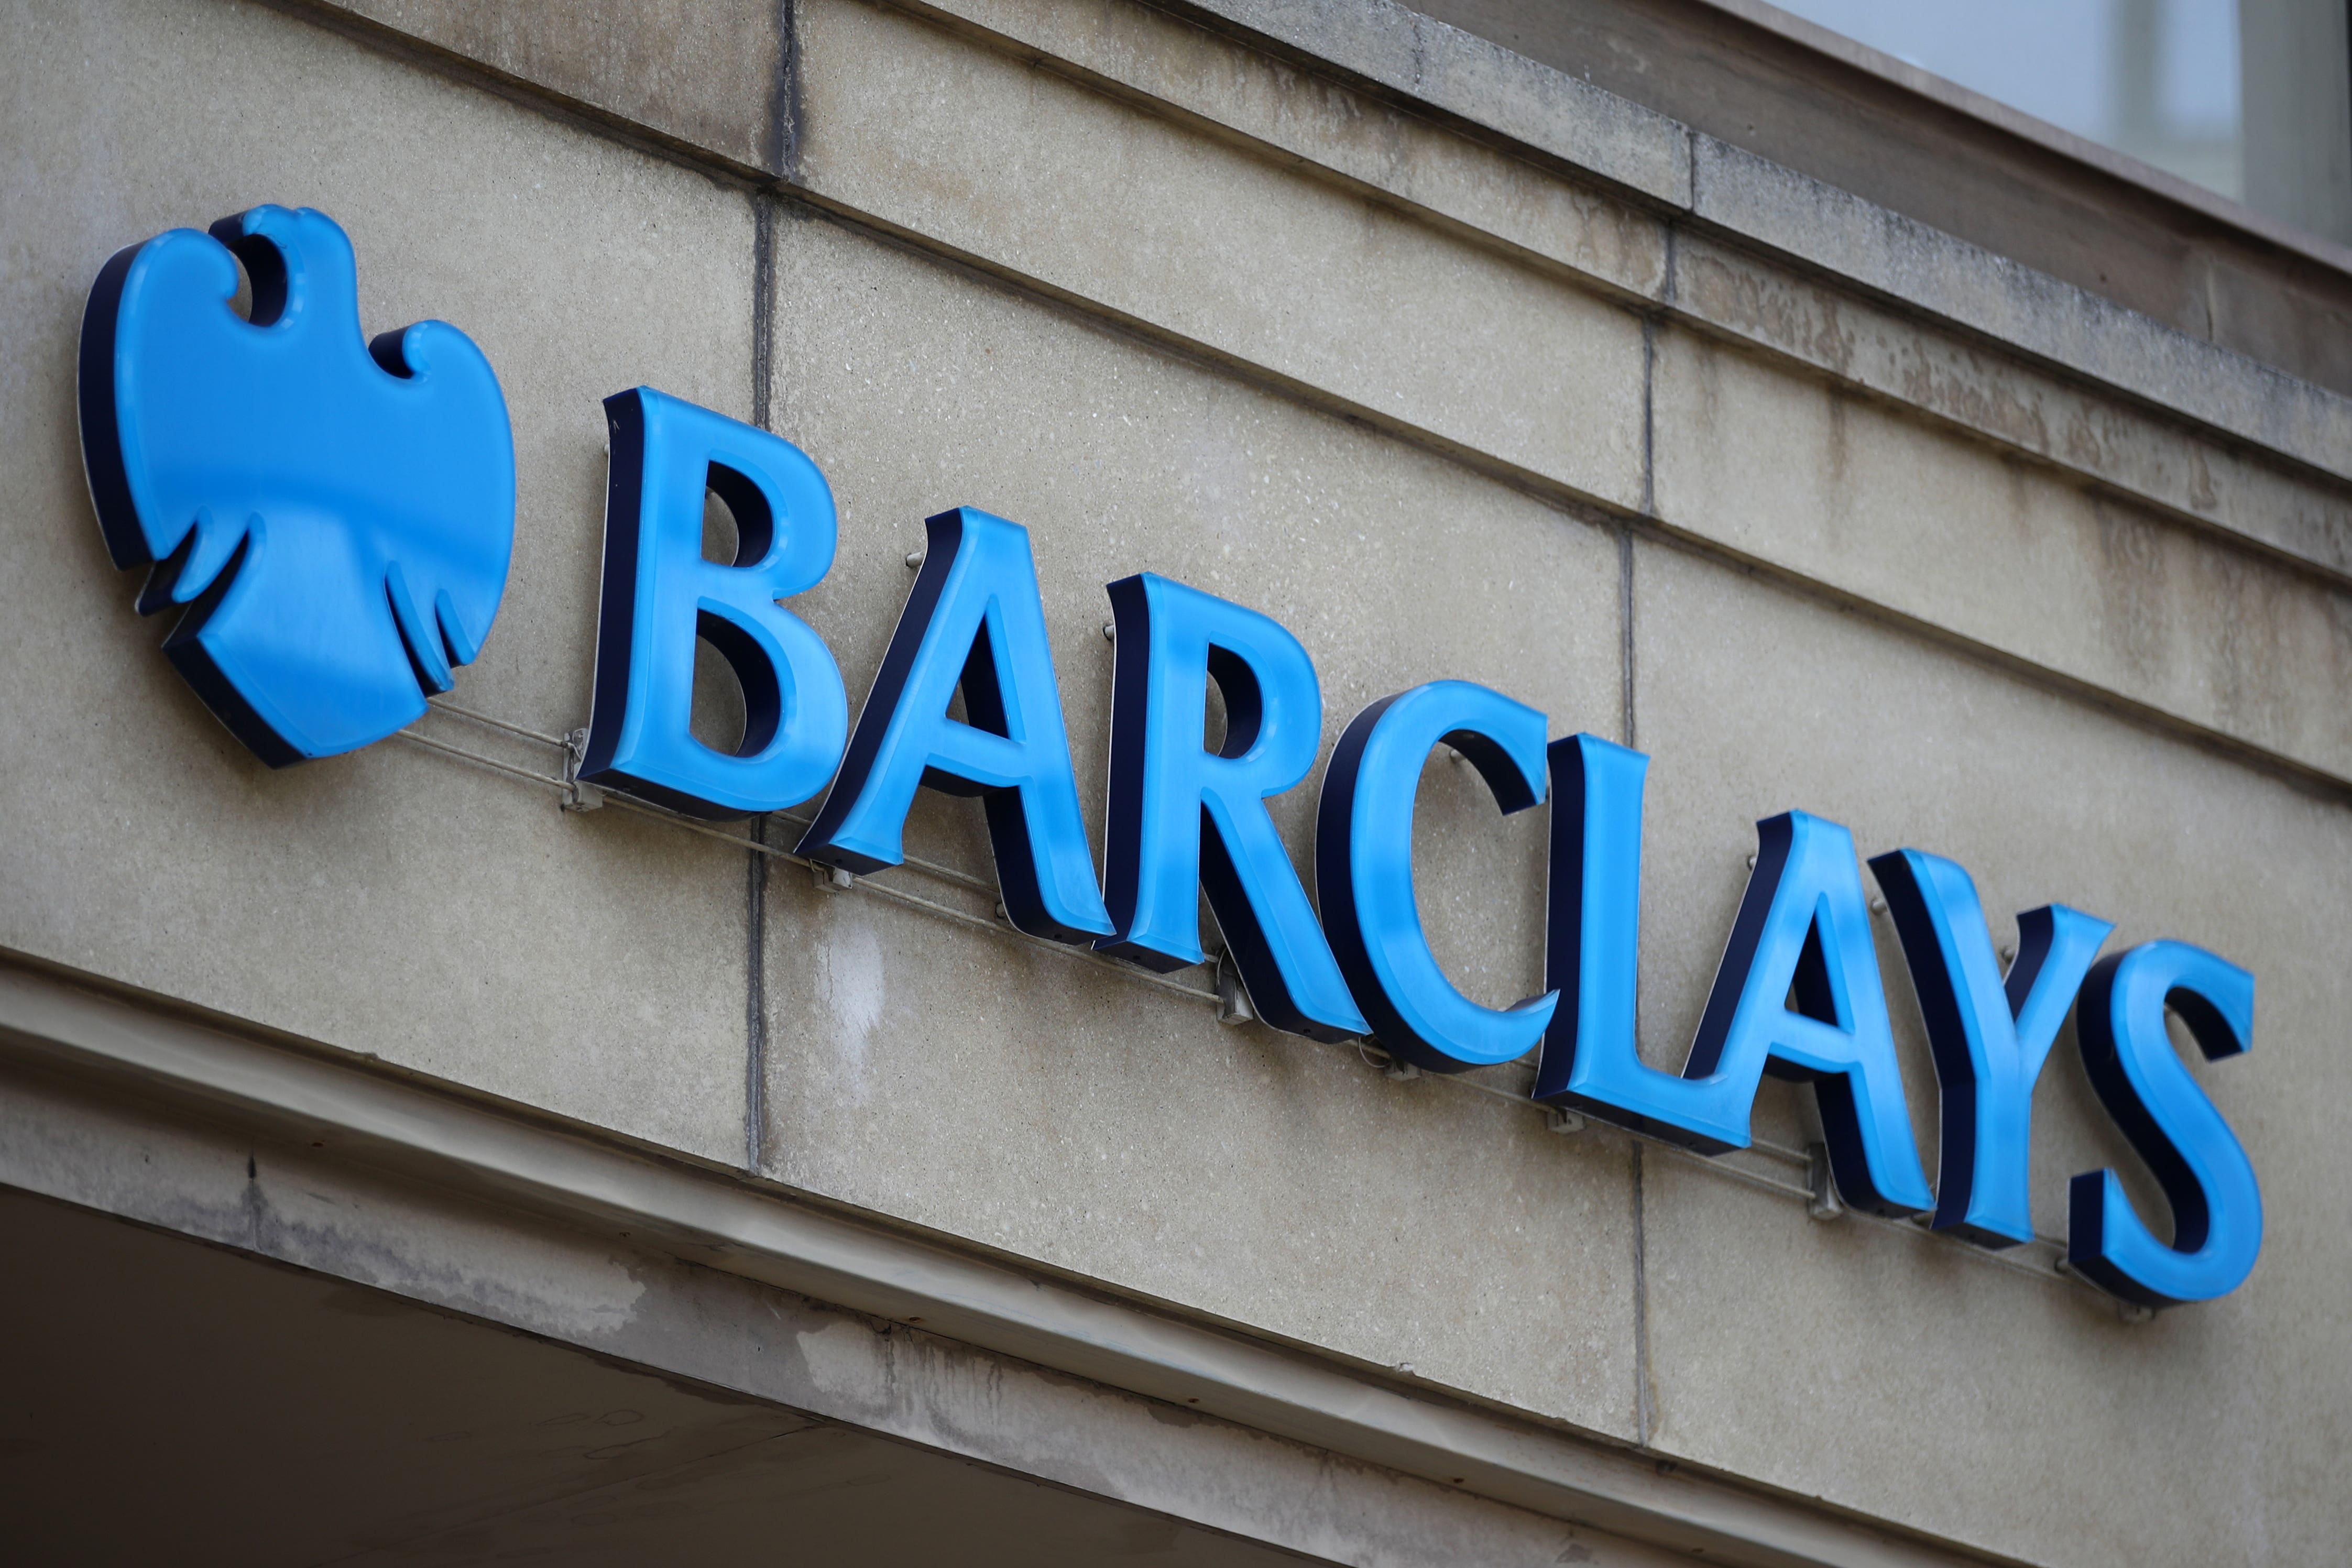 Barclays apologised to the woman after wrongly declaring her dead